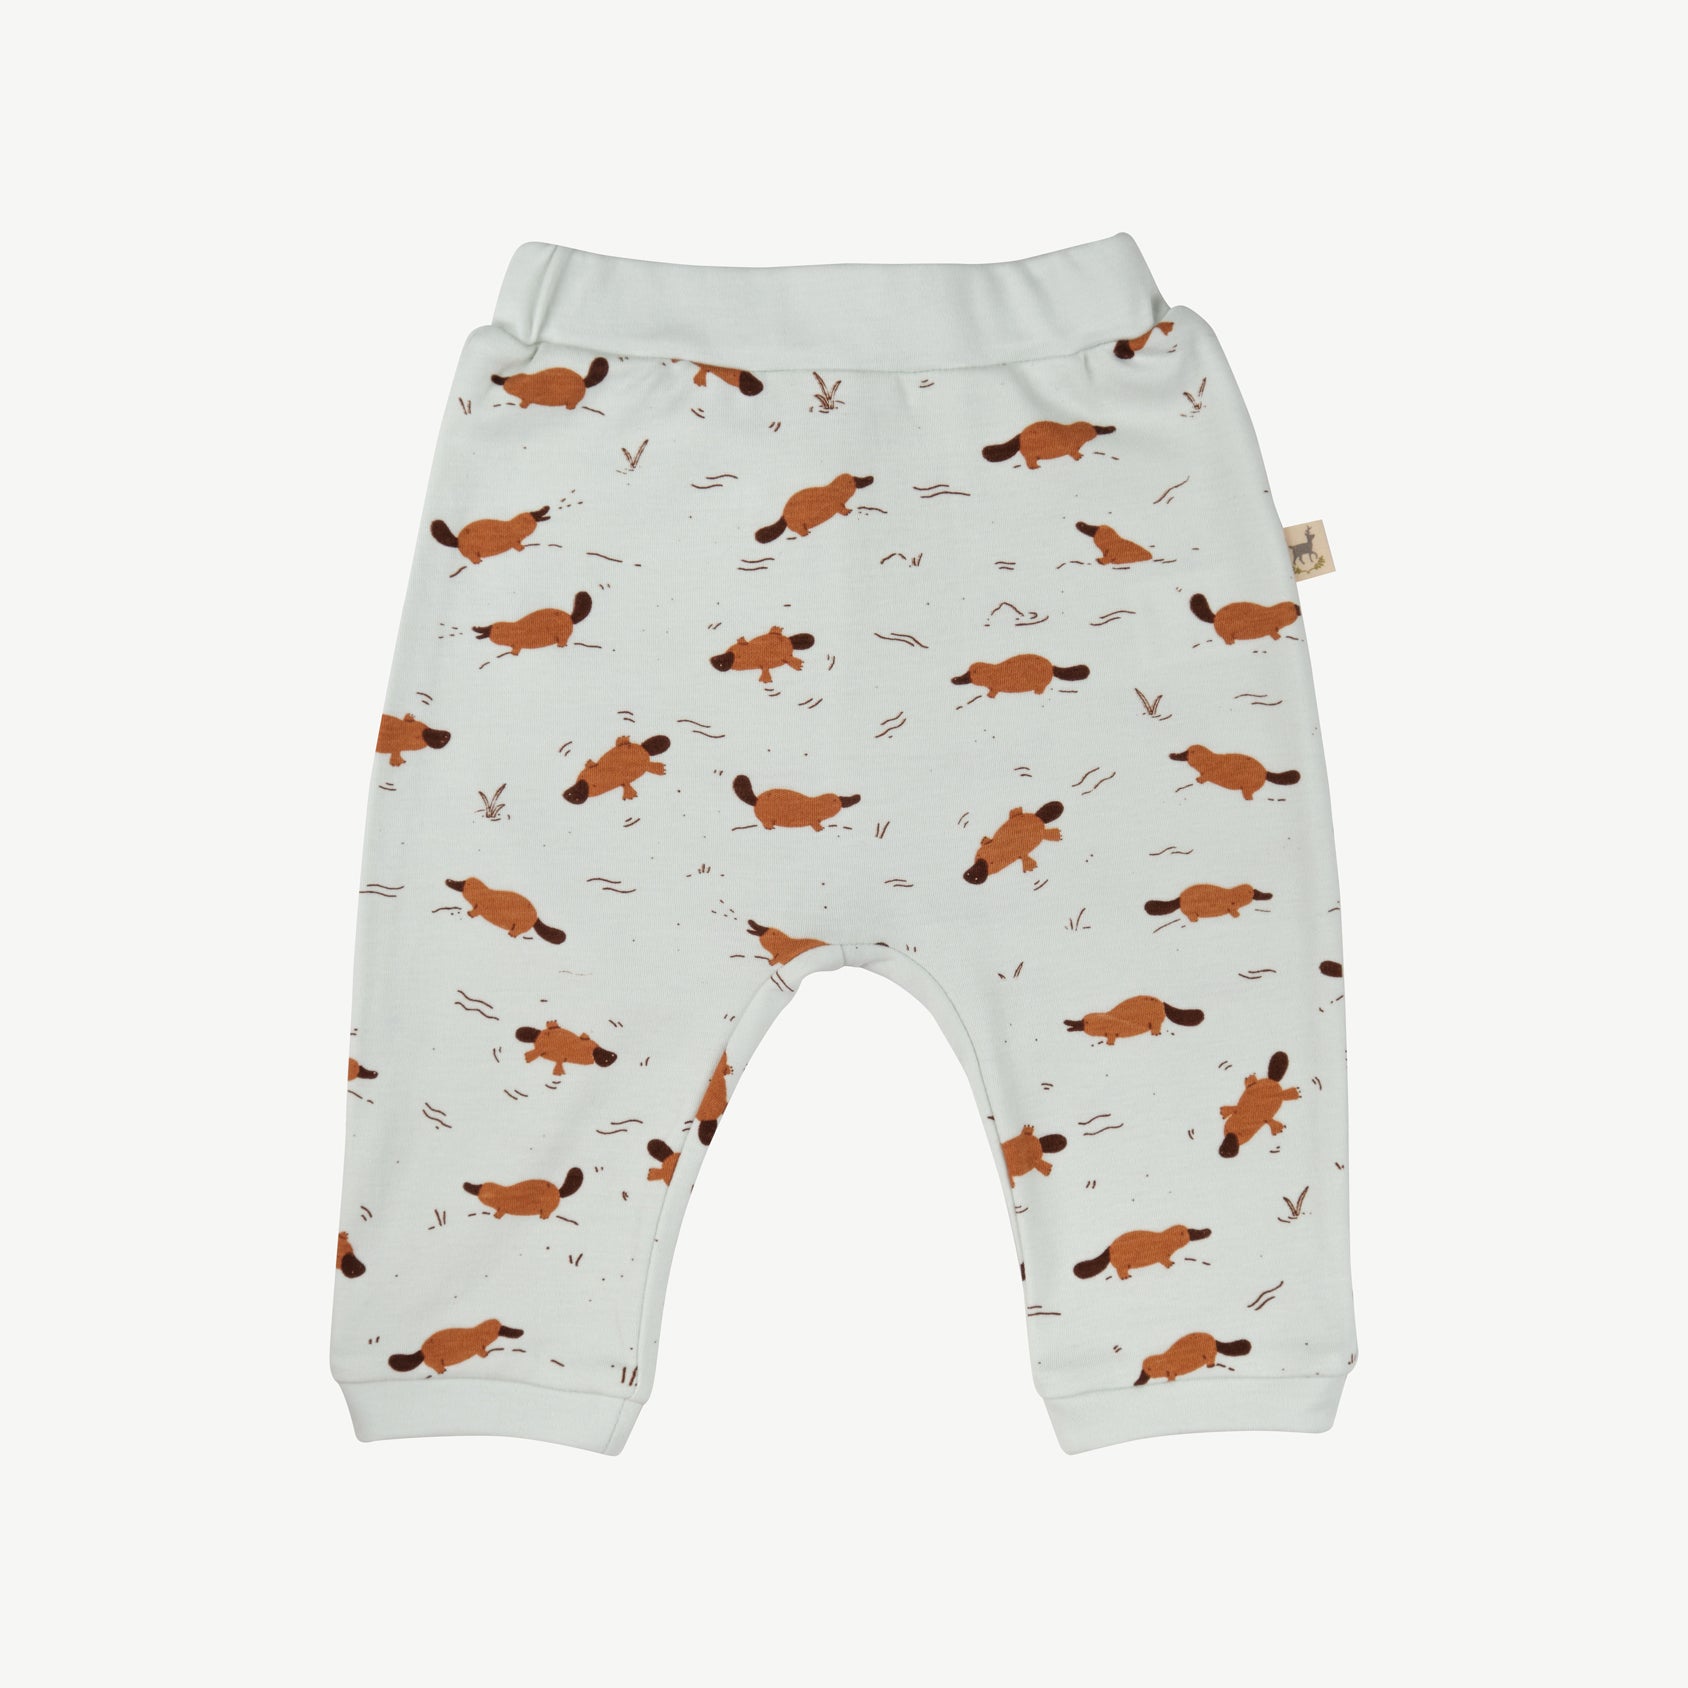 'platypus pond' ice flow onesie + pants baby outfit